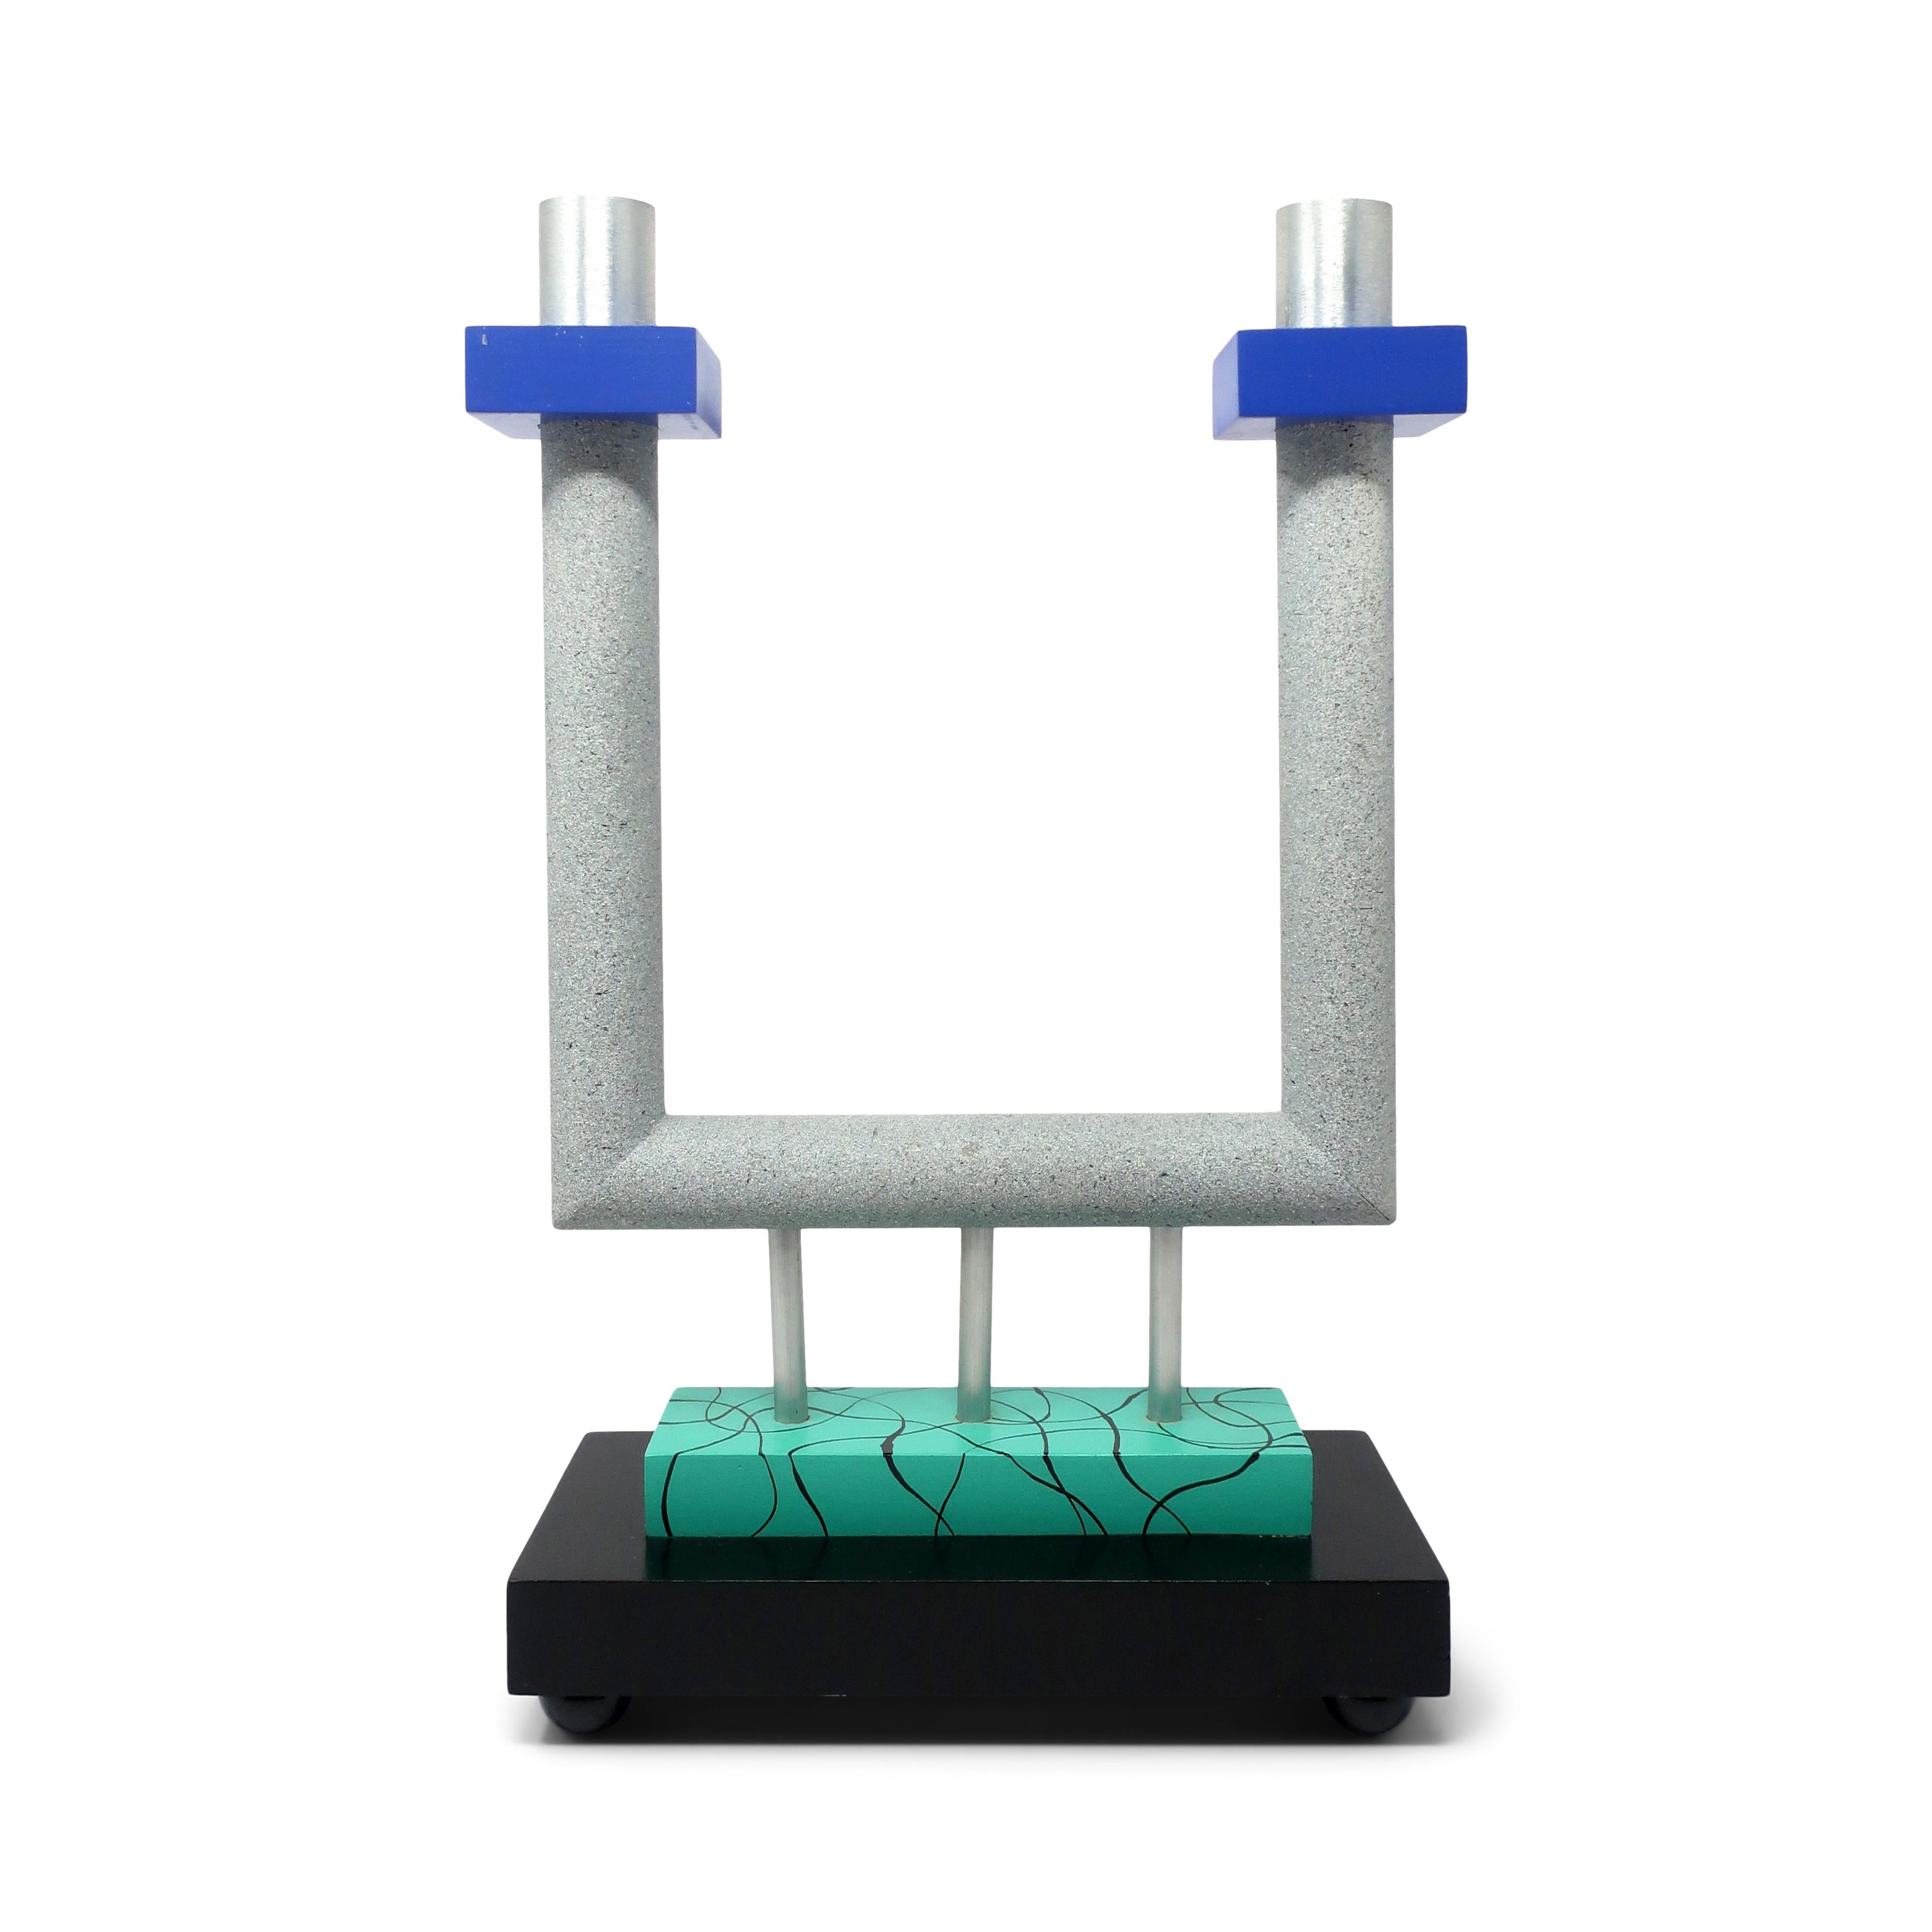 A stunning postmodern candlestick holder designed by Lyn Godley and Lloyd Schwan for their furniture, tabletop, and jewelry design company Godley-Schwan (1984-1998). Sitting on a black and turquoise base, the candelabra is constructed from lacquered